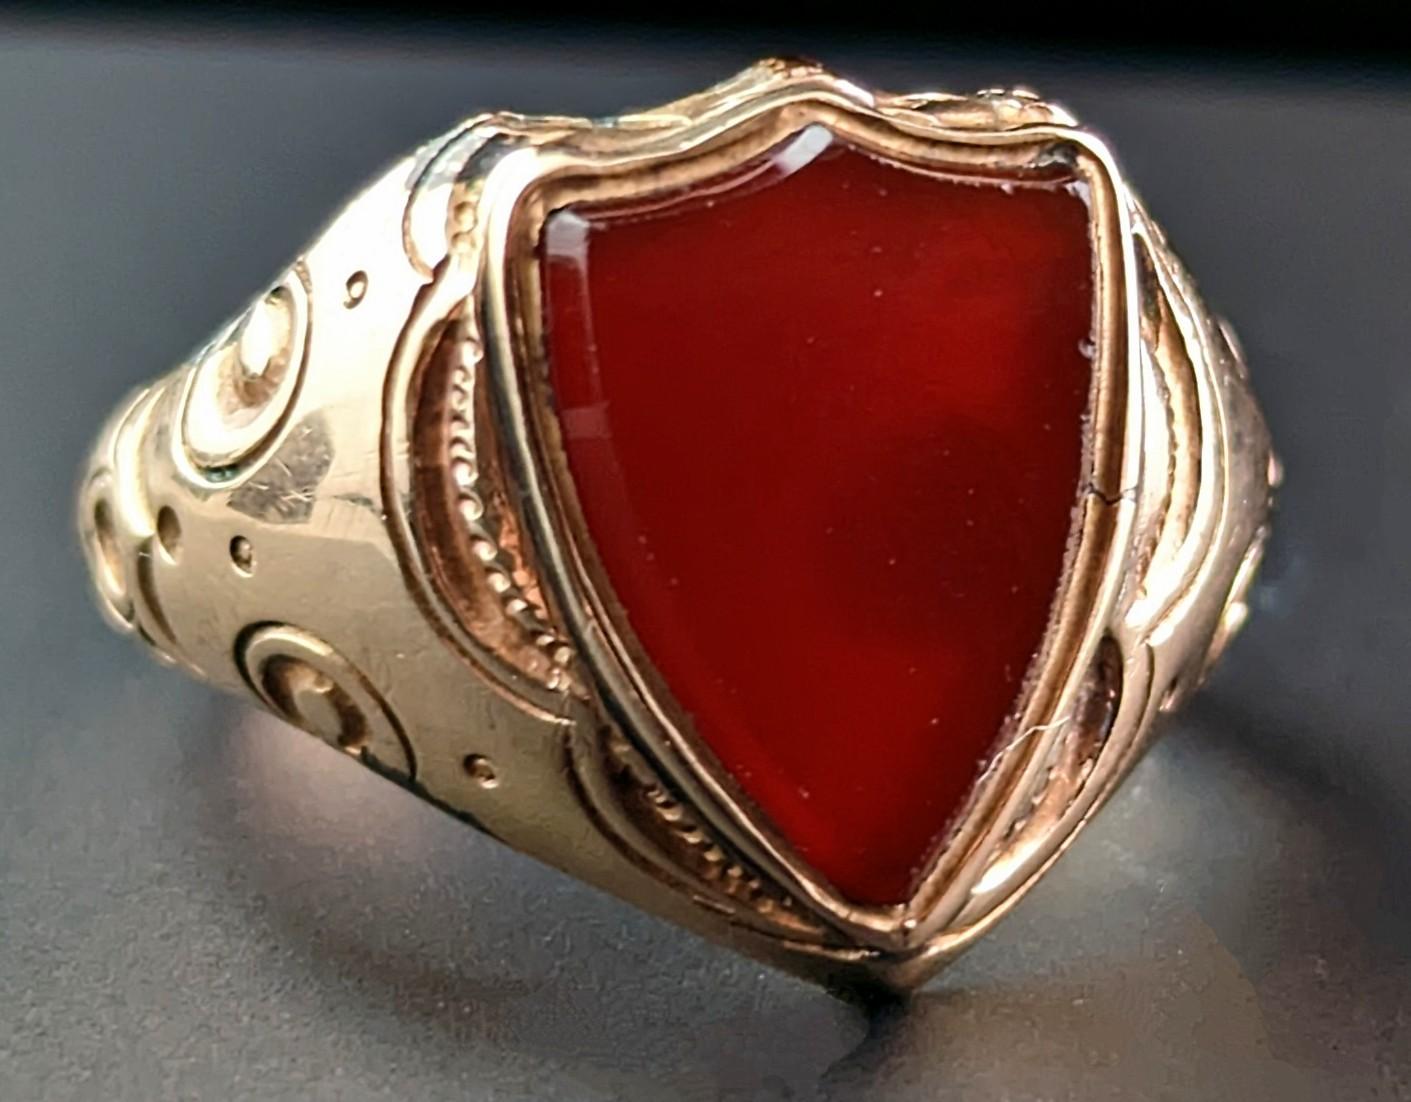 This antique, Edwardian era 9kt gold and Carnelian signet ring really has a lot going on!

It is truly a statement signet ring and is very grand and regal with an unusual design.

It has an shield shaped face set with a rich orangey red Carnelian